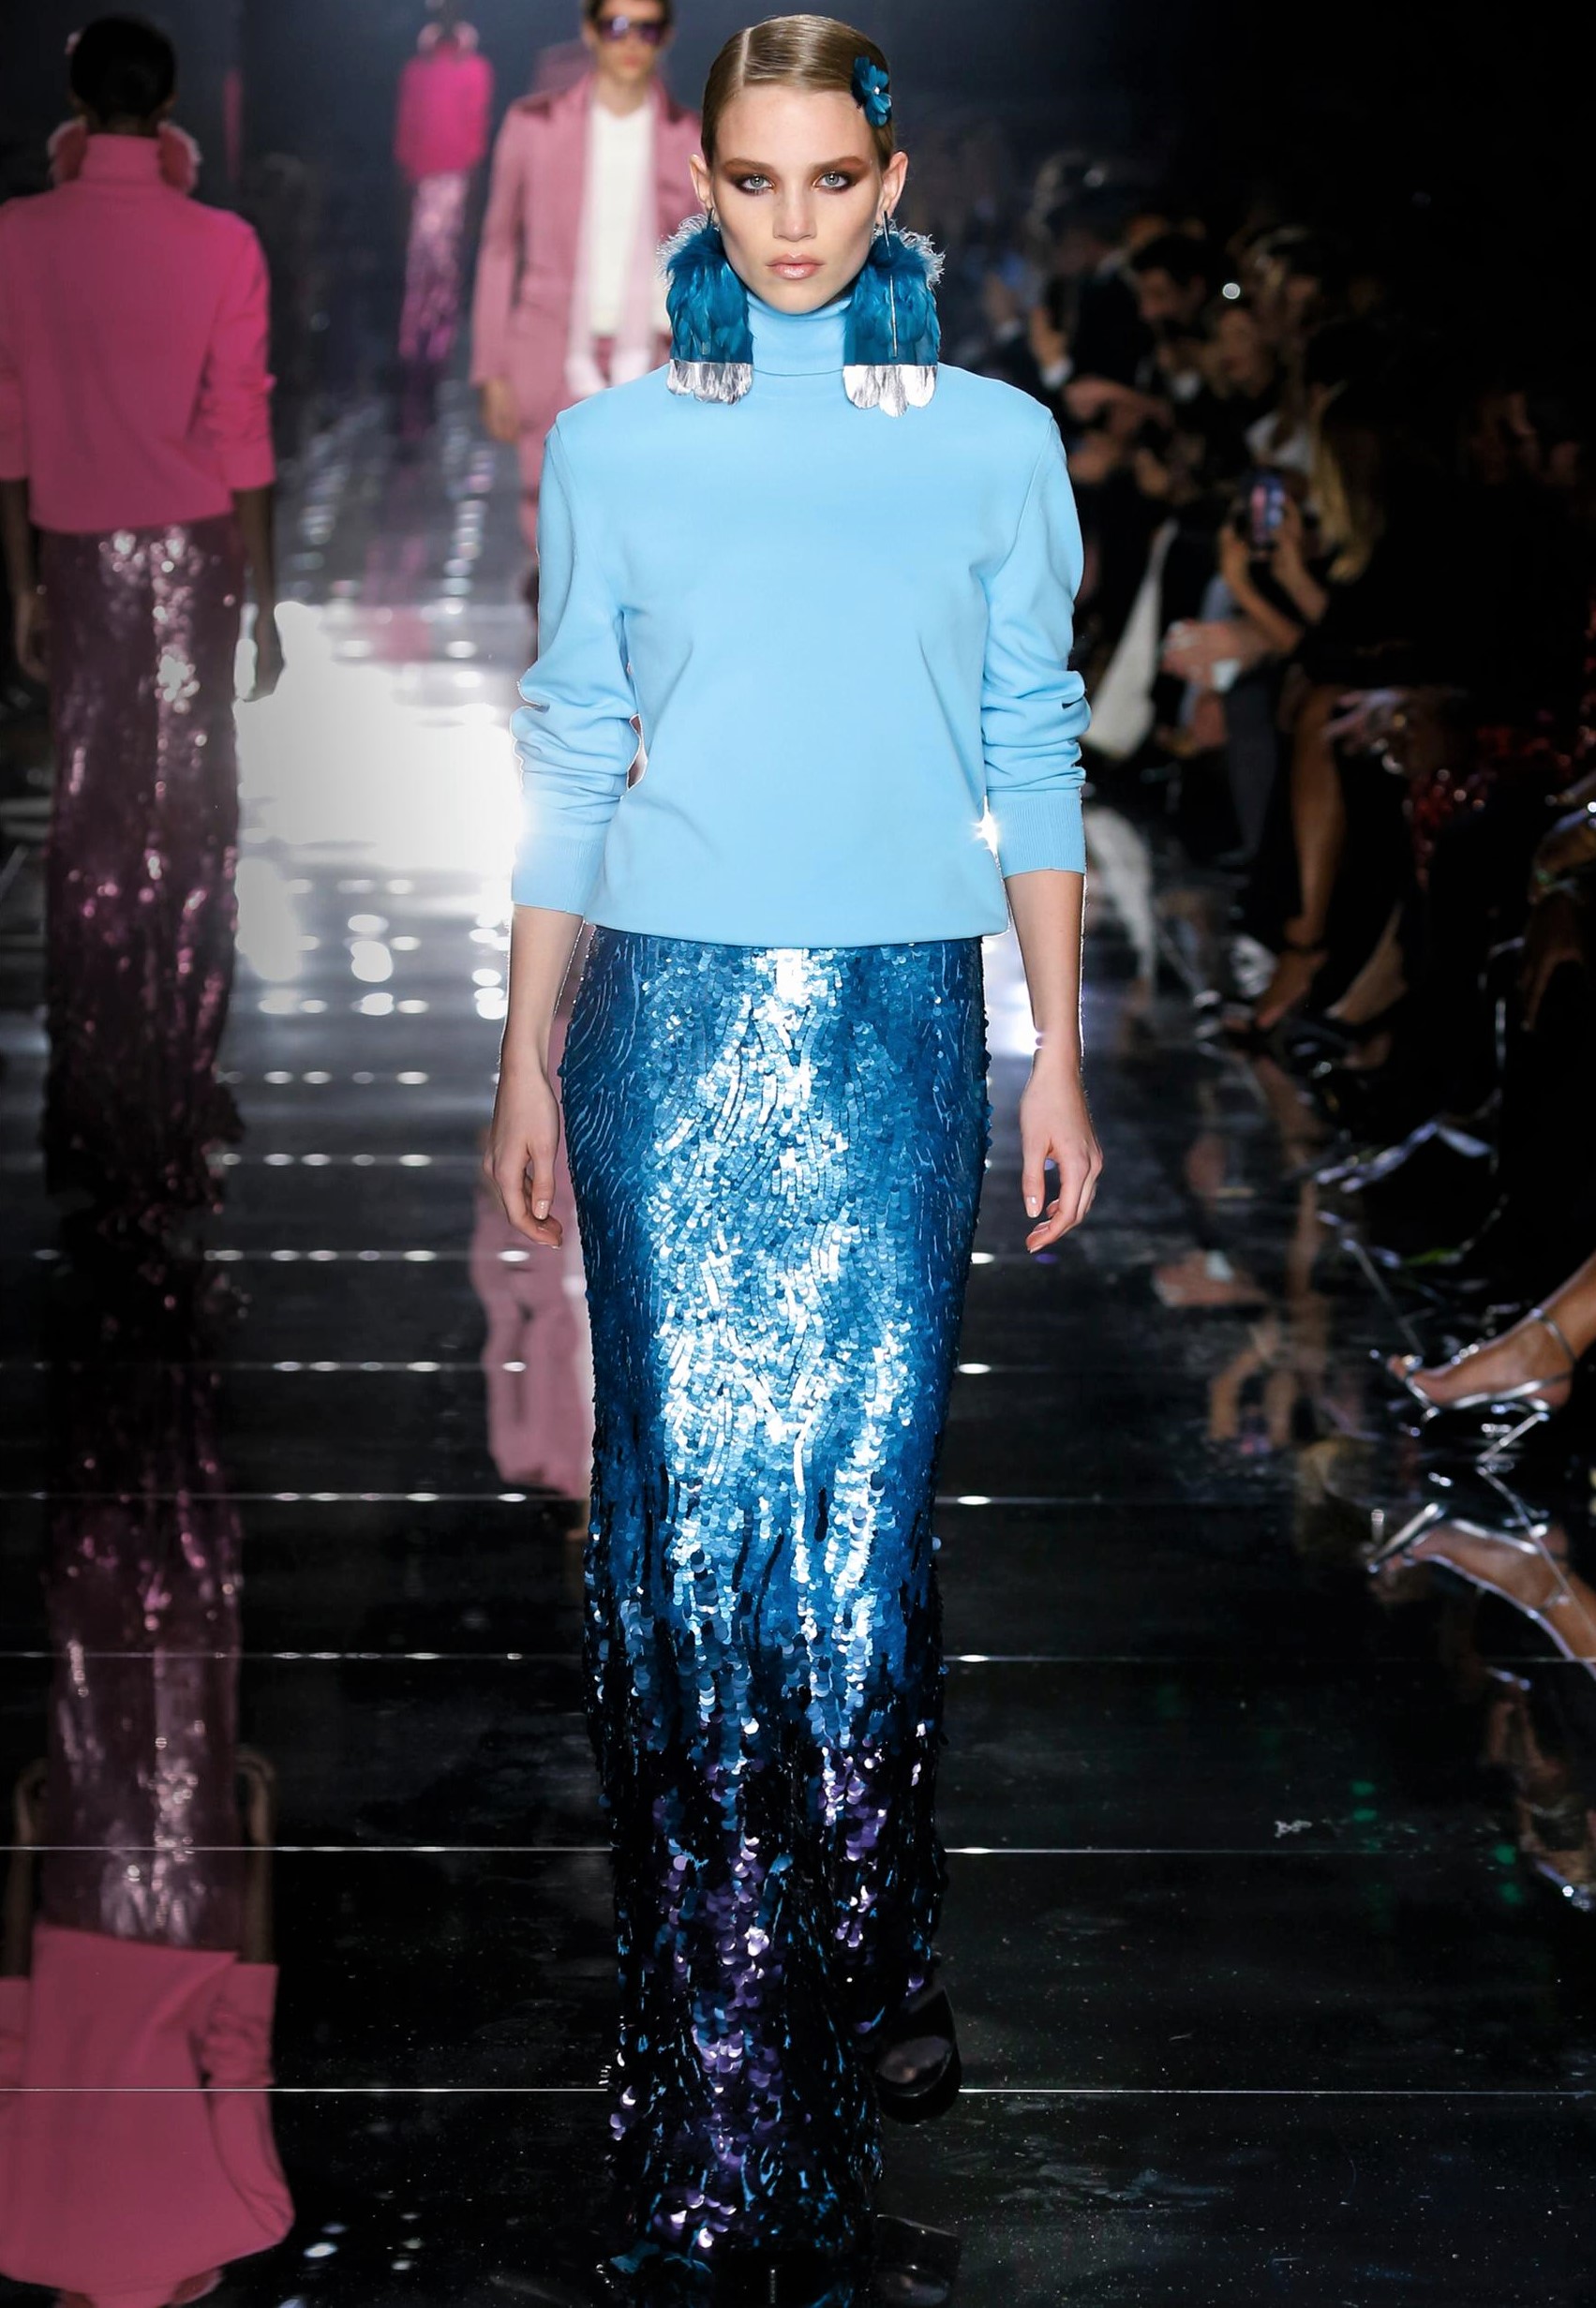 Tom Ford Winter 2020 blue seq gown (2) cropped.jpg